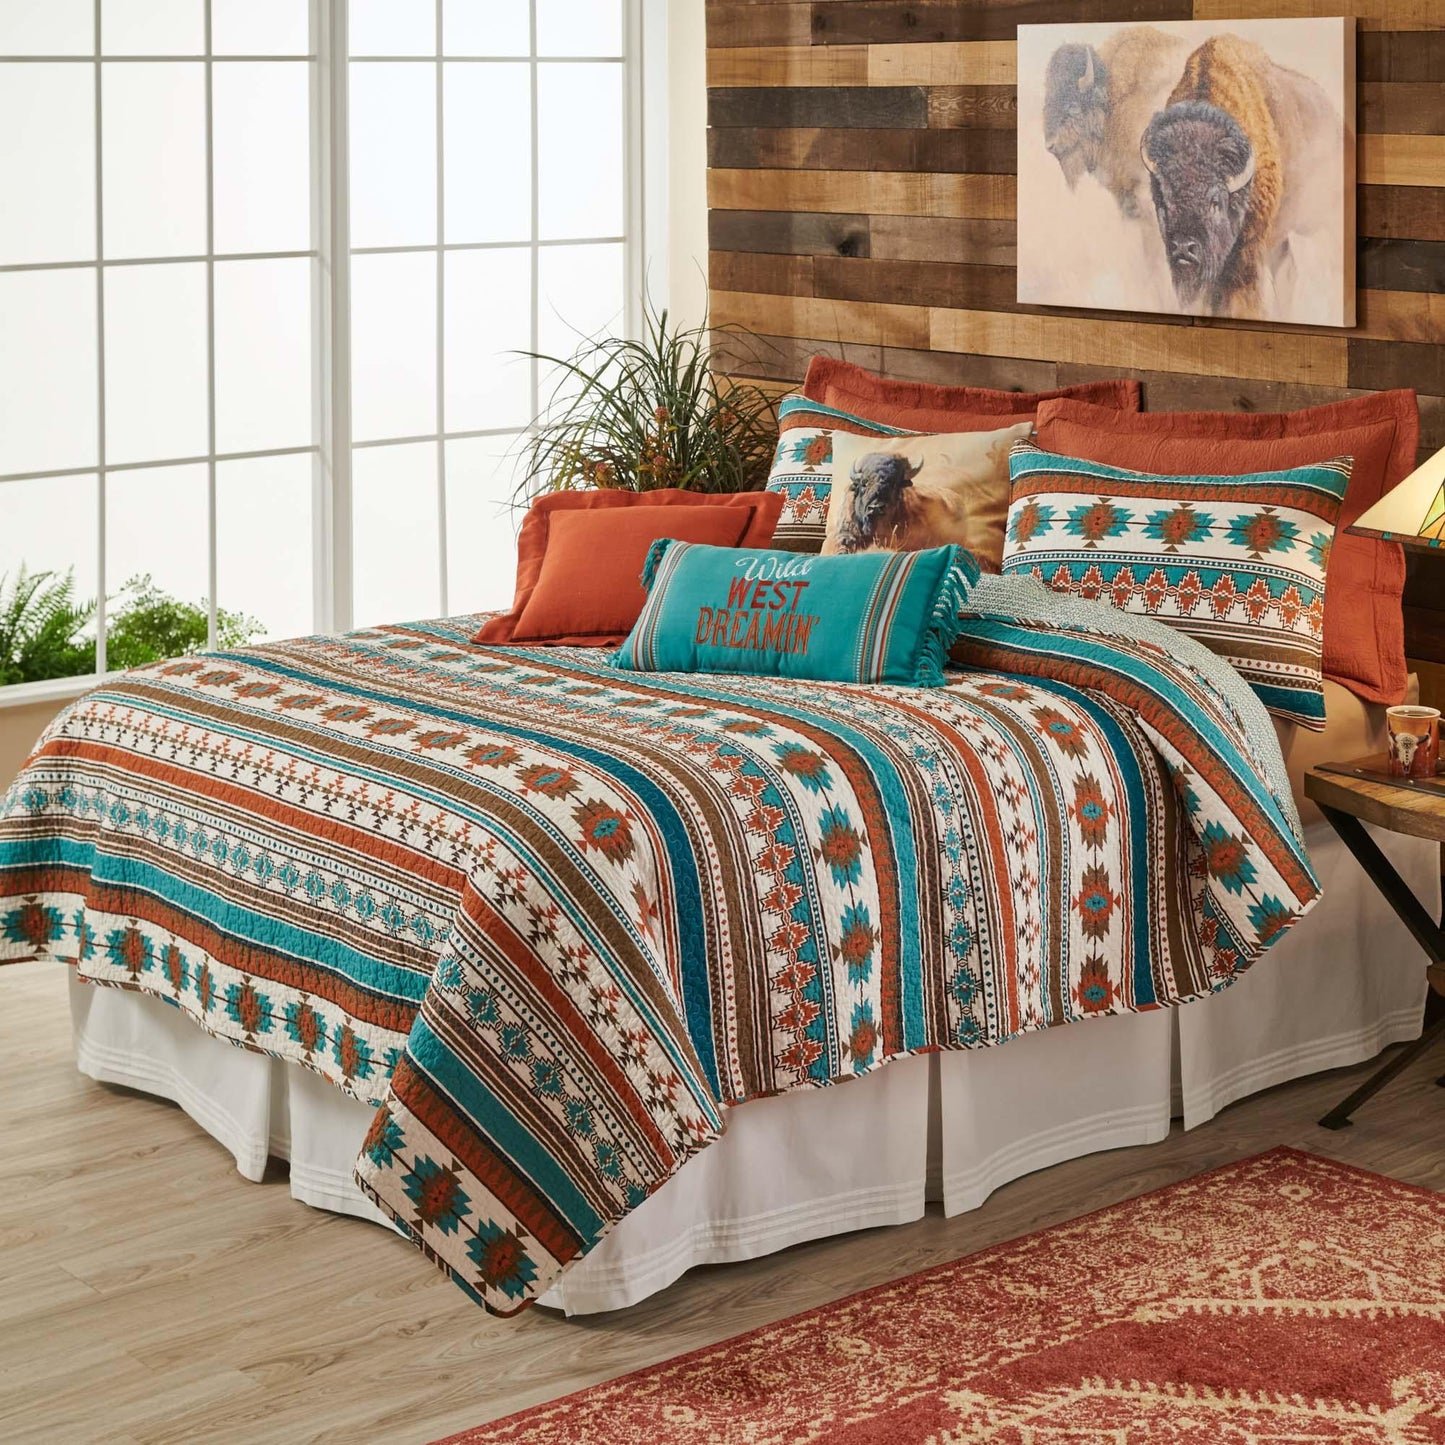 Wildest Dreams Quilt Bedding Set (King) - Wild Wings